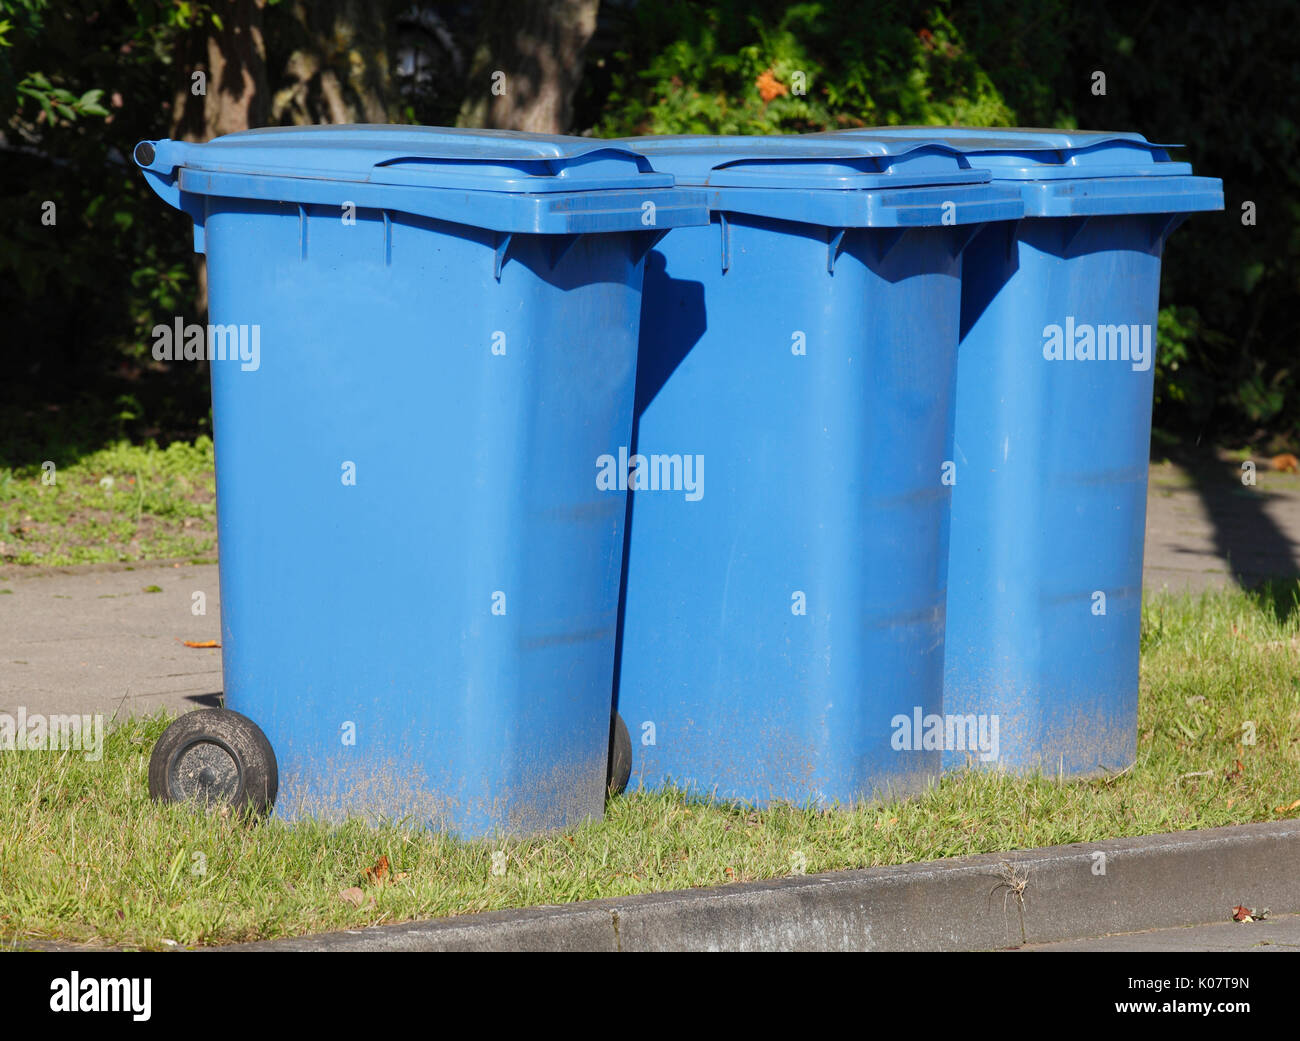 blue plastic recycling bins for waste paper Stock Photo